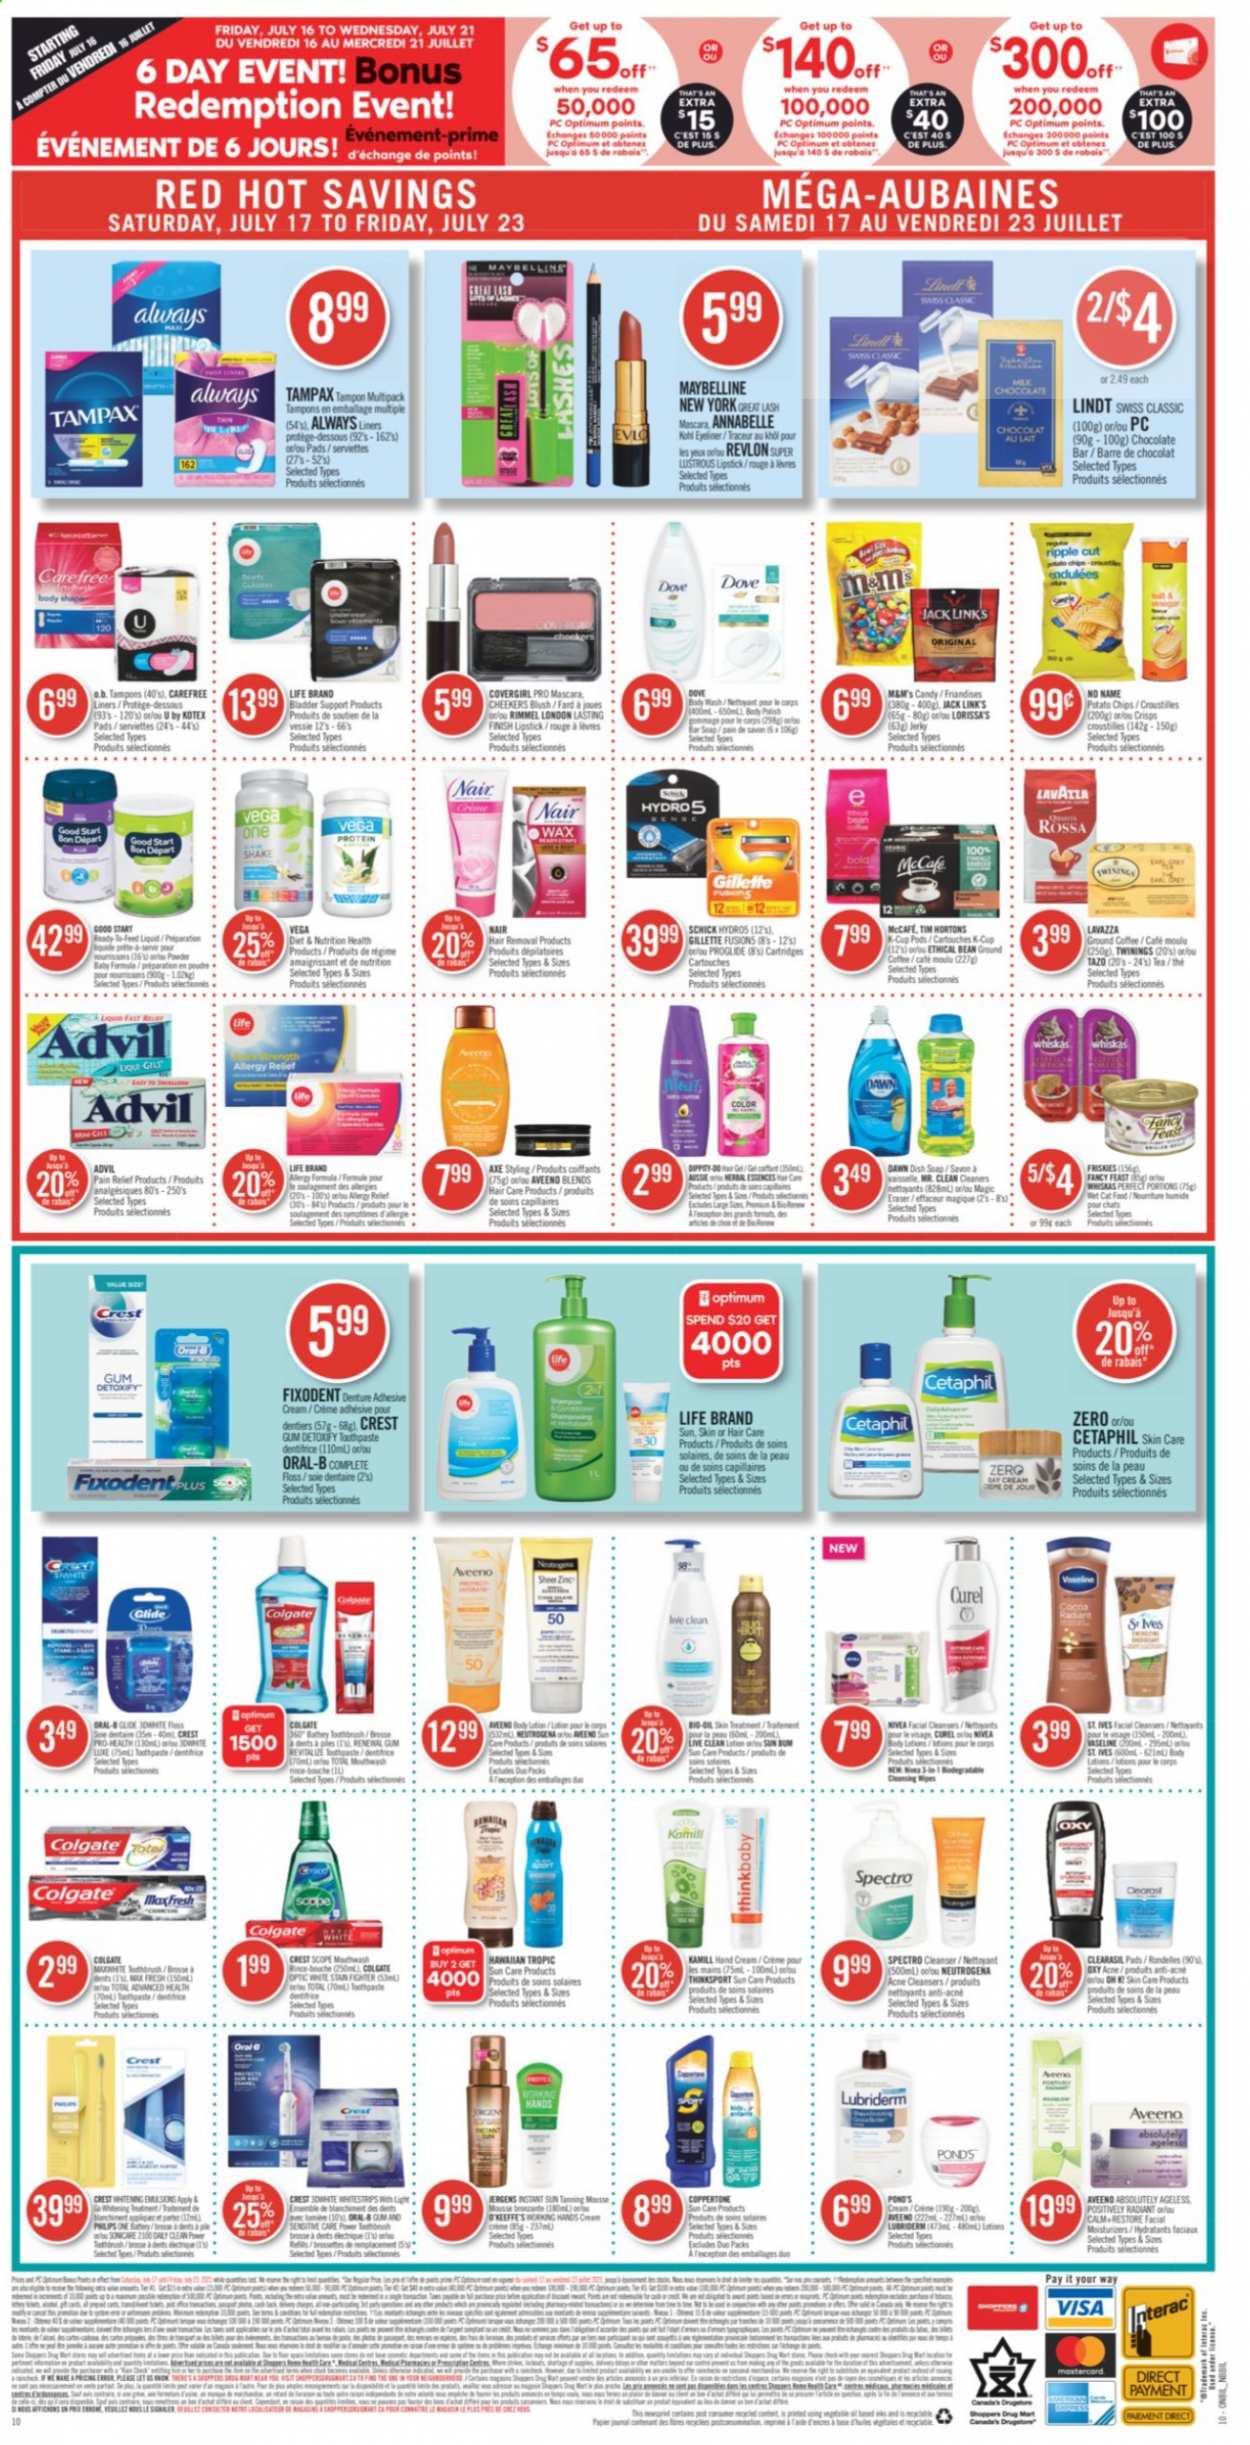 thumbnail - Shoppers Drug Mart Flyer - July 17, 2021 - July 23, 2021 - Sales products - chocolate bar, potato chips, Jack Link's, oil, tea, Twinings, coffee, ground coffee, coffee capsules, McCafe, K-Cups, Lavazza, Aveeno, Always liners, body wash, Vaseline, soap bar, POND'S, soap, toothpaste, Fixodent, Crest, Carefree, Kotex, Kotex pads, tampons, cleanser, day cream, Curél, Revlon, Lubriderm, hand cream, Jergens, Schick, hair removal, lipstick, Rimmel, eyeliner, pain relief, Advil Rapid, allergy relief, Gillette, mascara, Maybelline, Neutrogena, Tampax, Nivea, Oral-B, chips. Page 14.